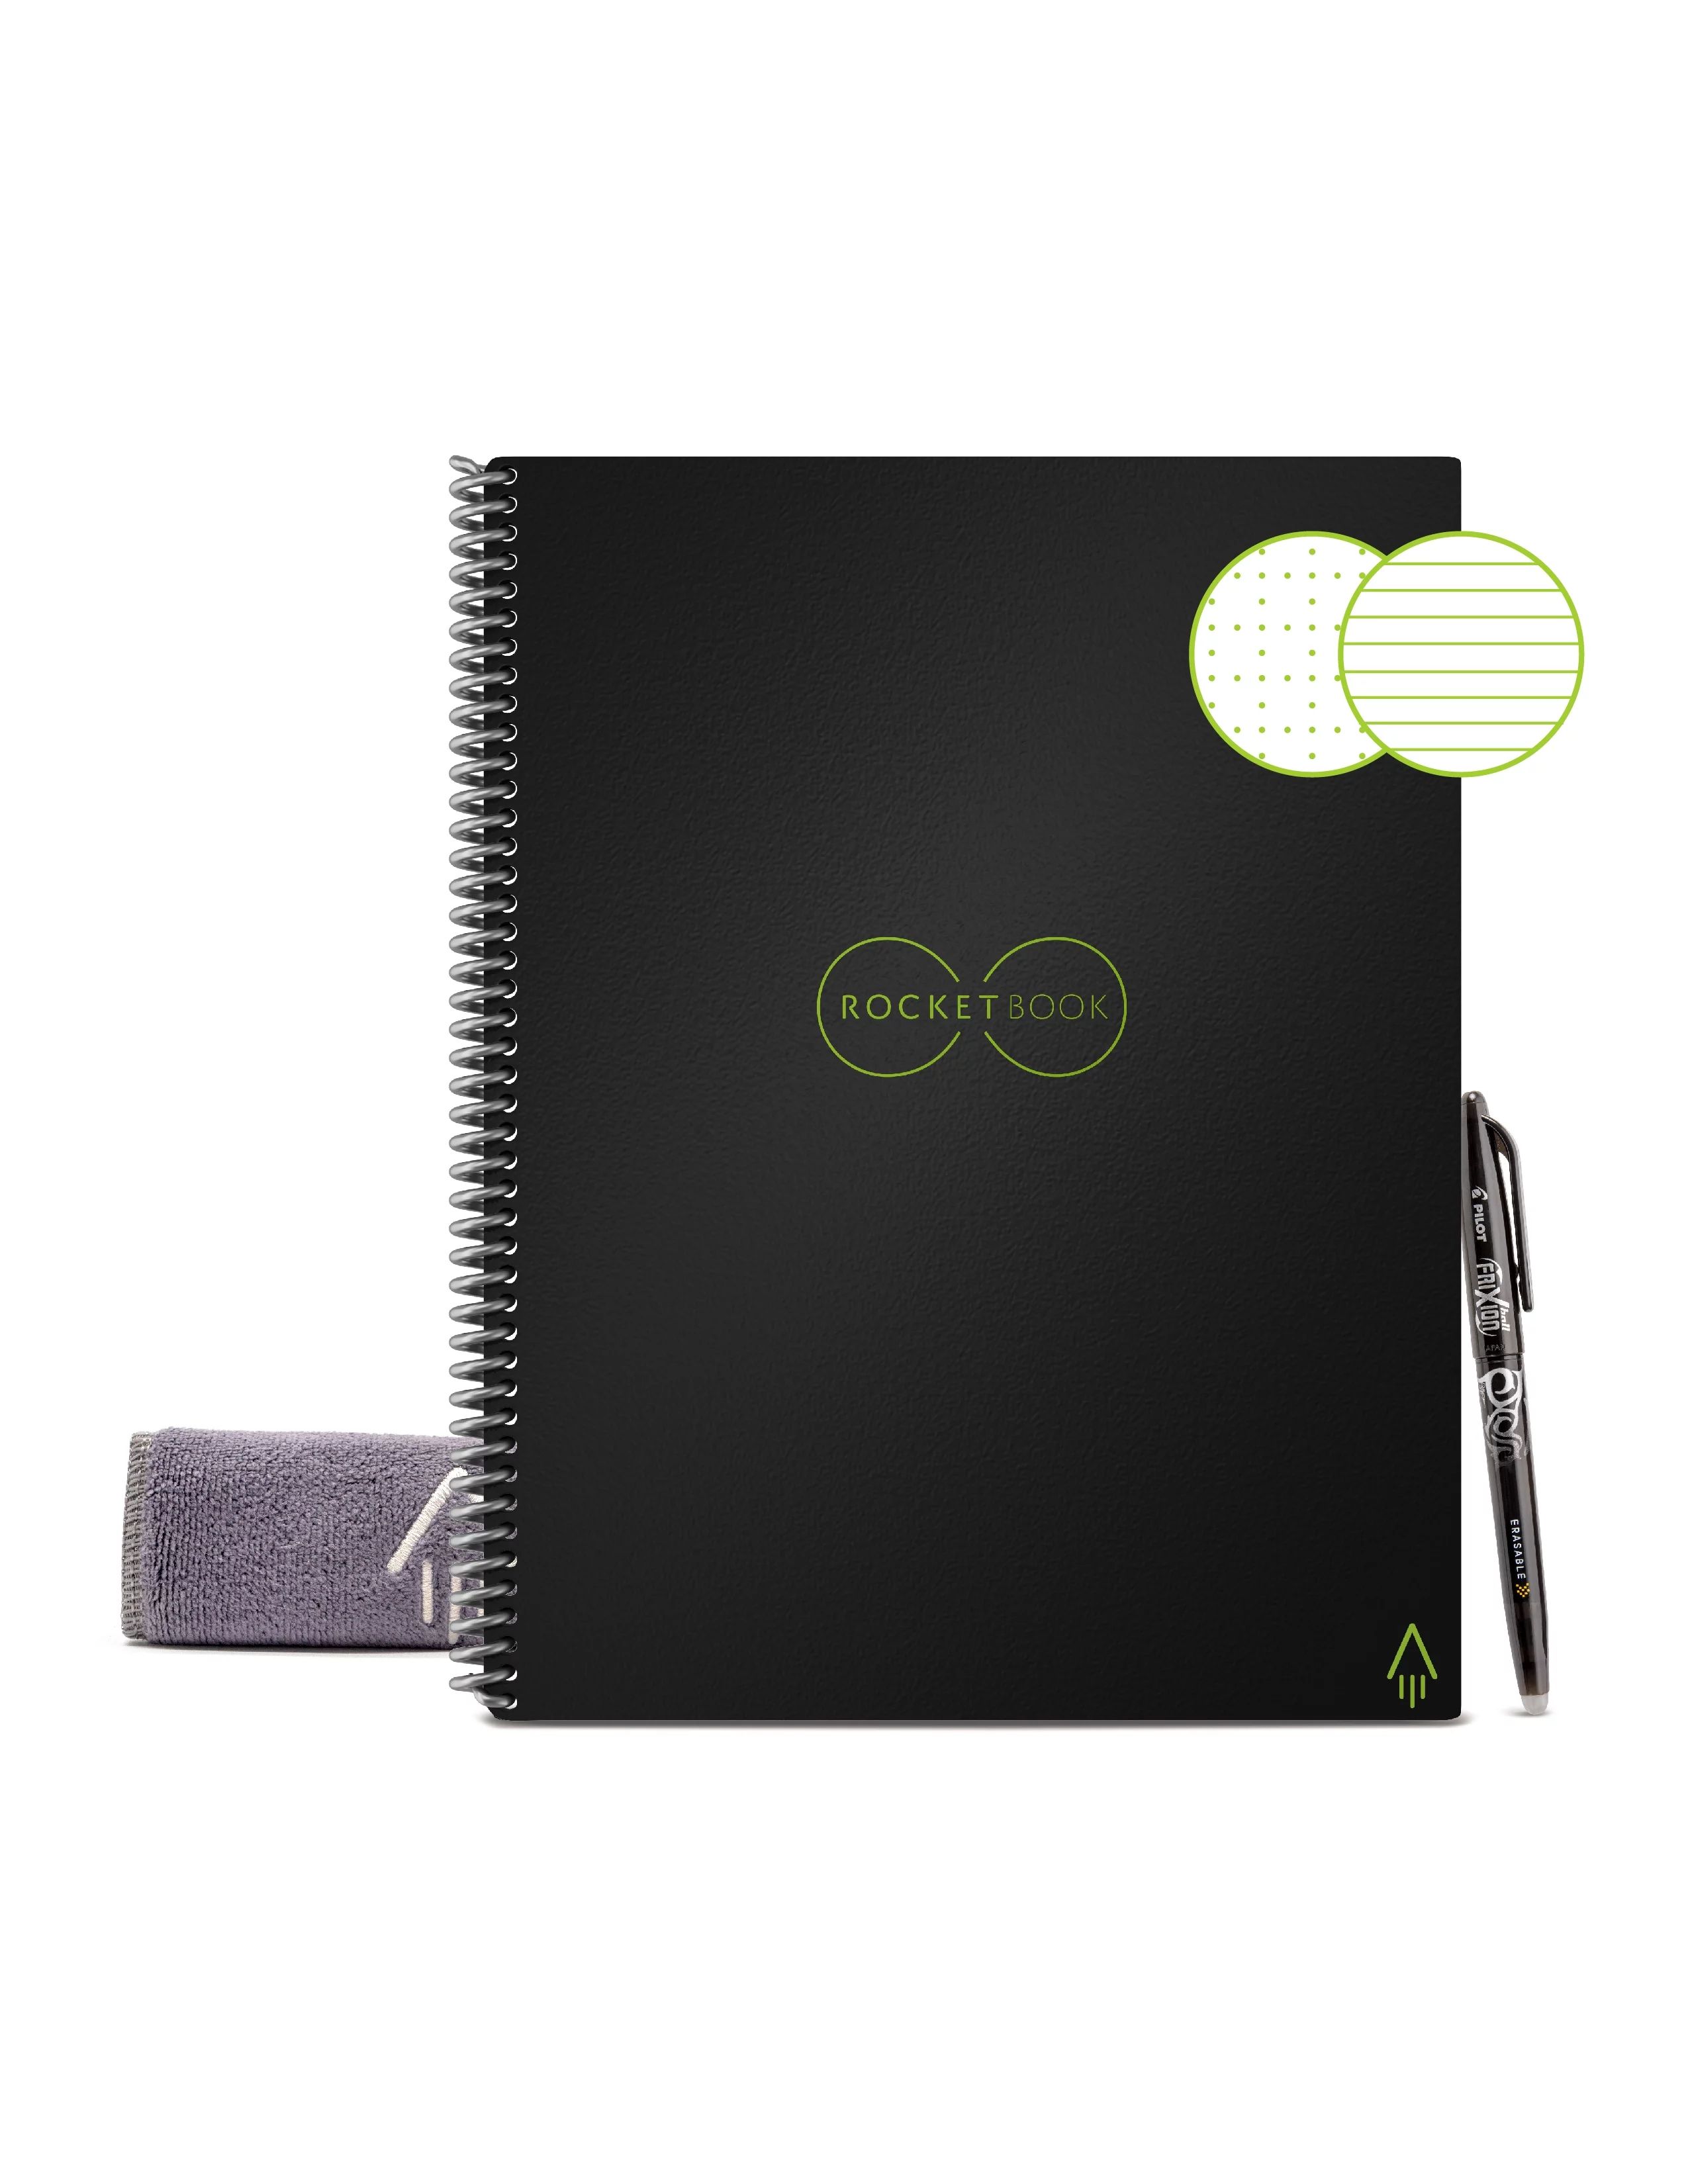 Rocketbook Core Smart Spiral Notebook, Dot-Grid and Lined Pages, 32 Pages, 8.5" x 11", Black | Walmart (US)